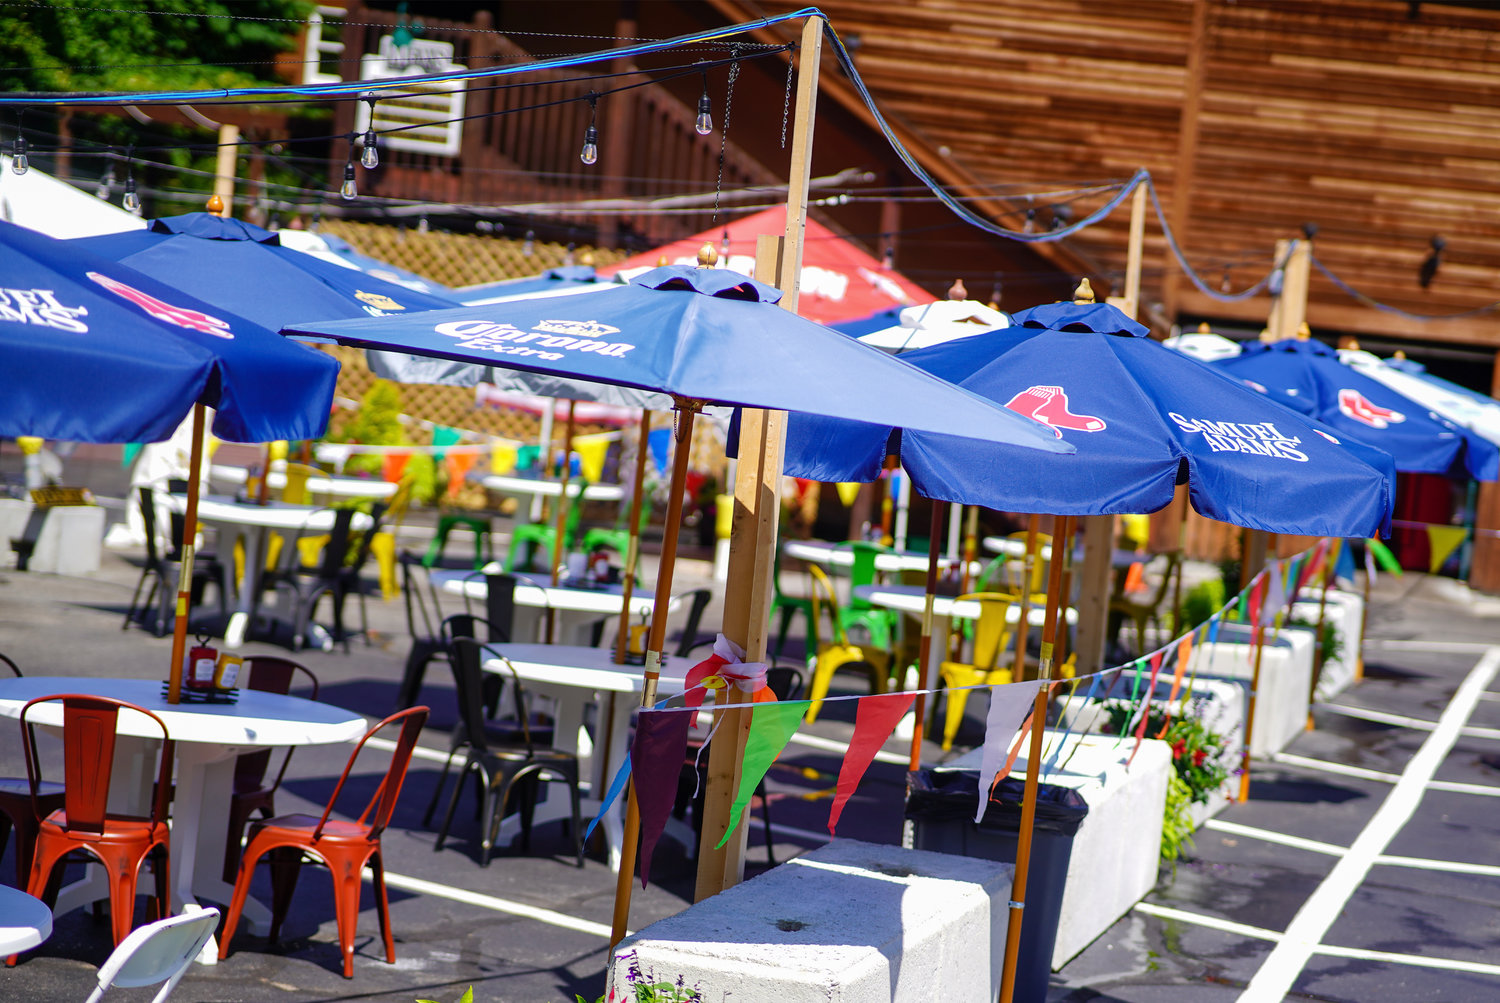 Mews Tavern converts parking space for outdoor eating amidst COVID-19 restrictions